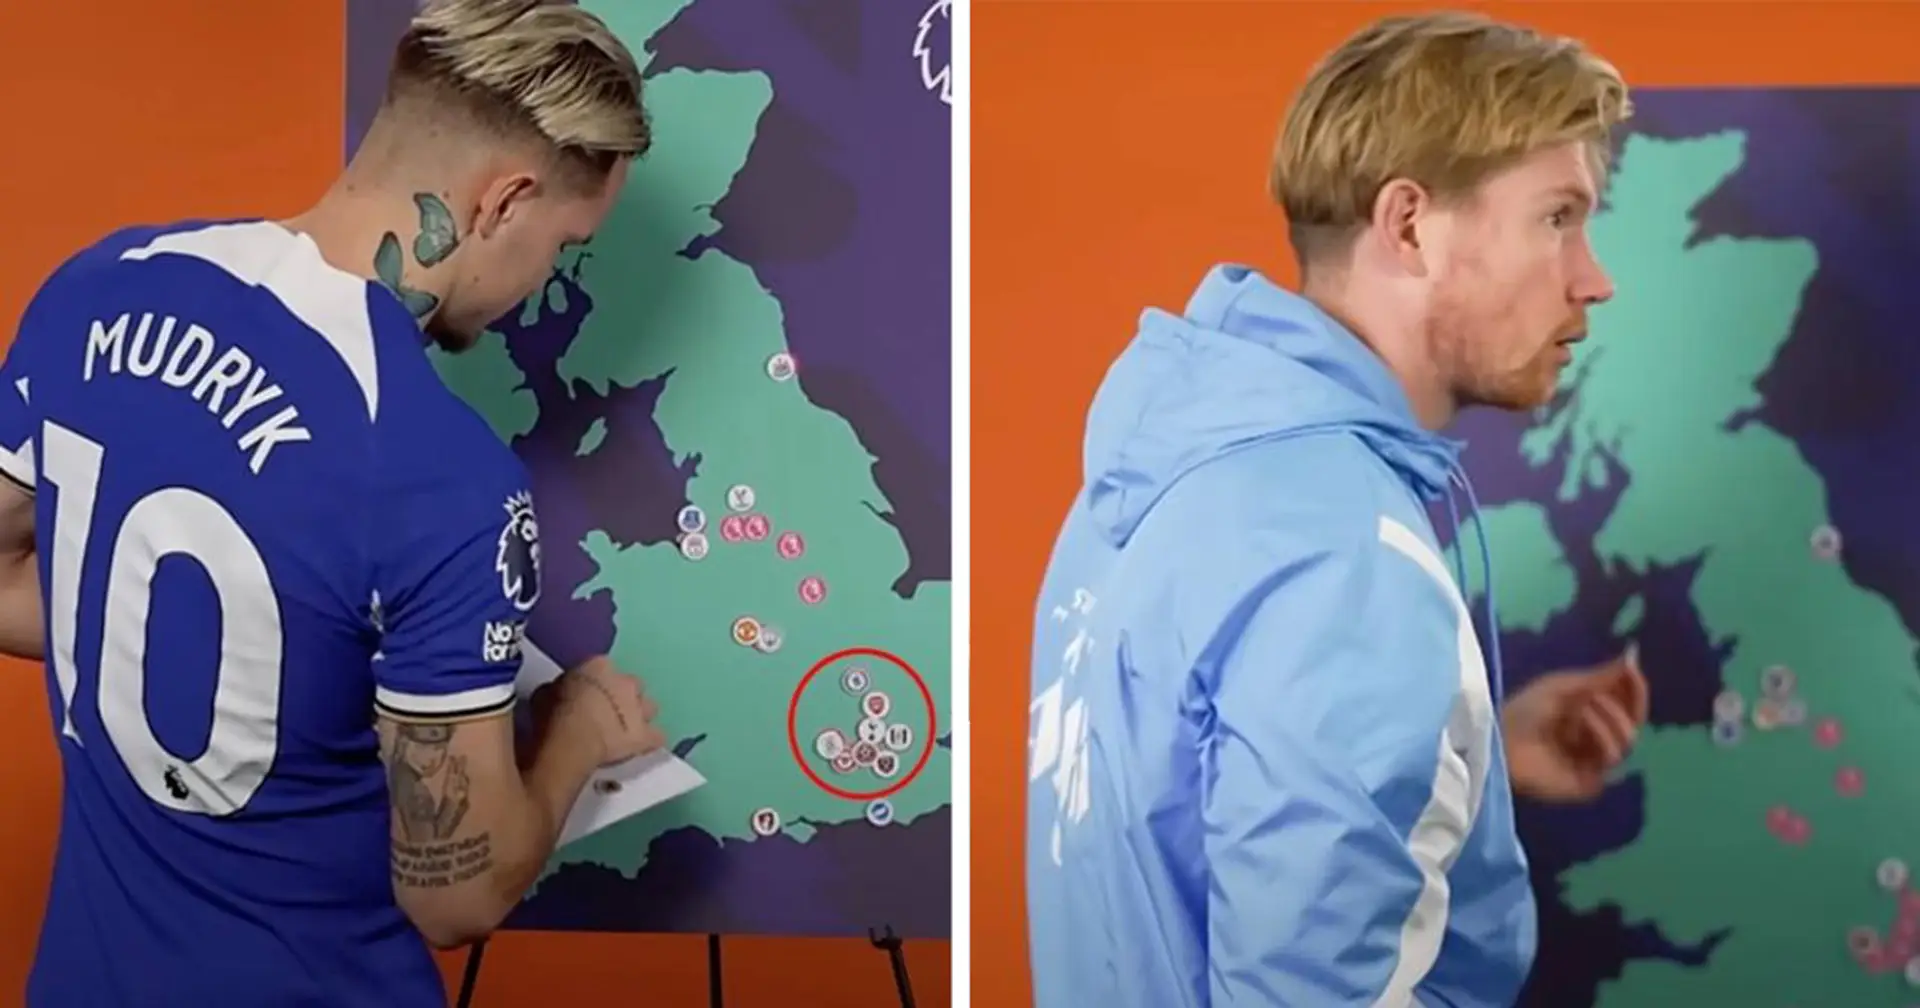 Premier League has checked Mudryk and De Bruyne in Geography skills